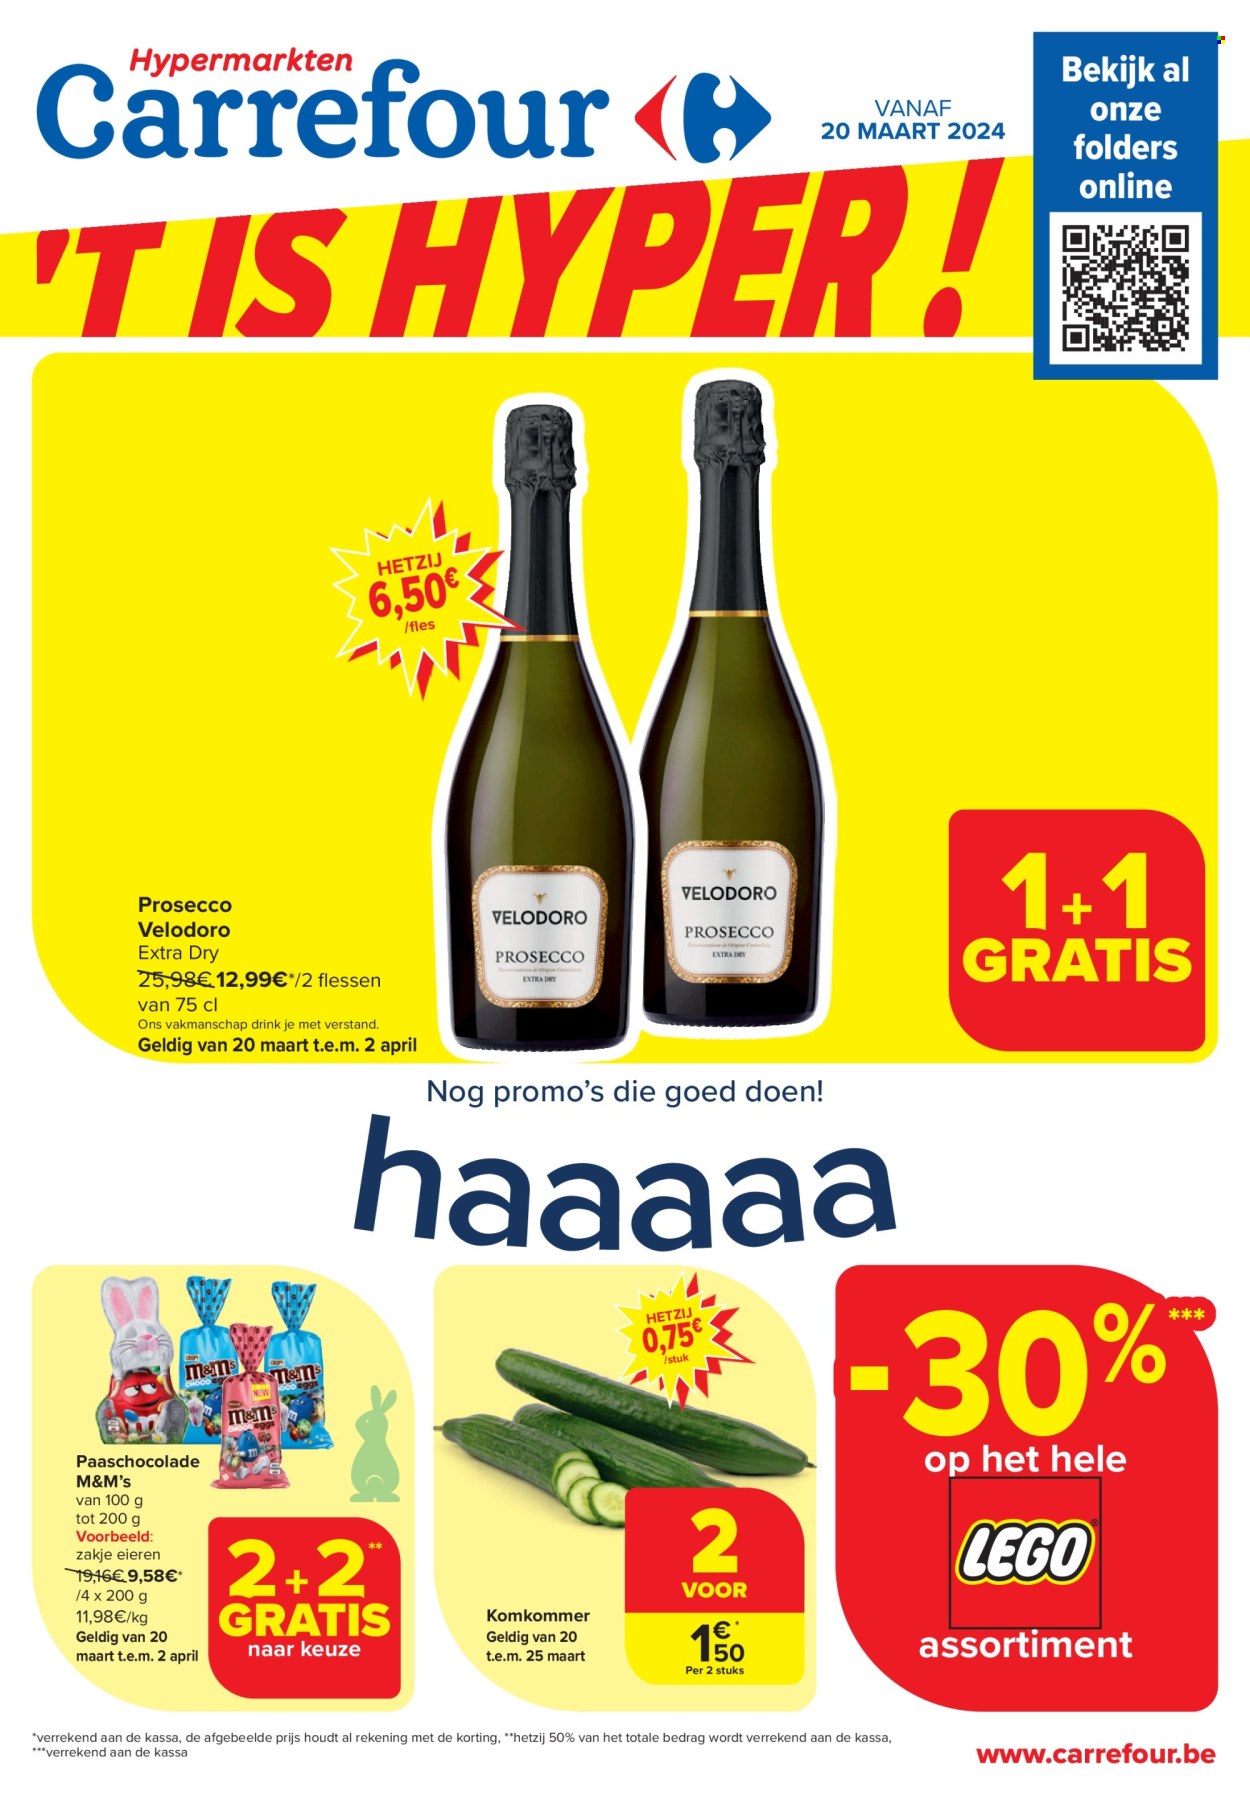 Catalogue Carrefour hypermarkt - 20.3.2024 - 2.4.2024. Page 1.